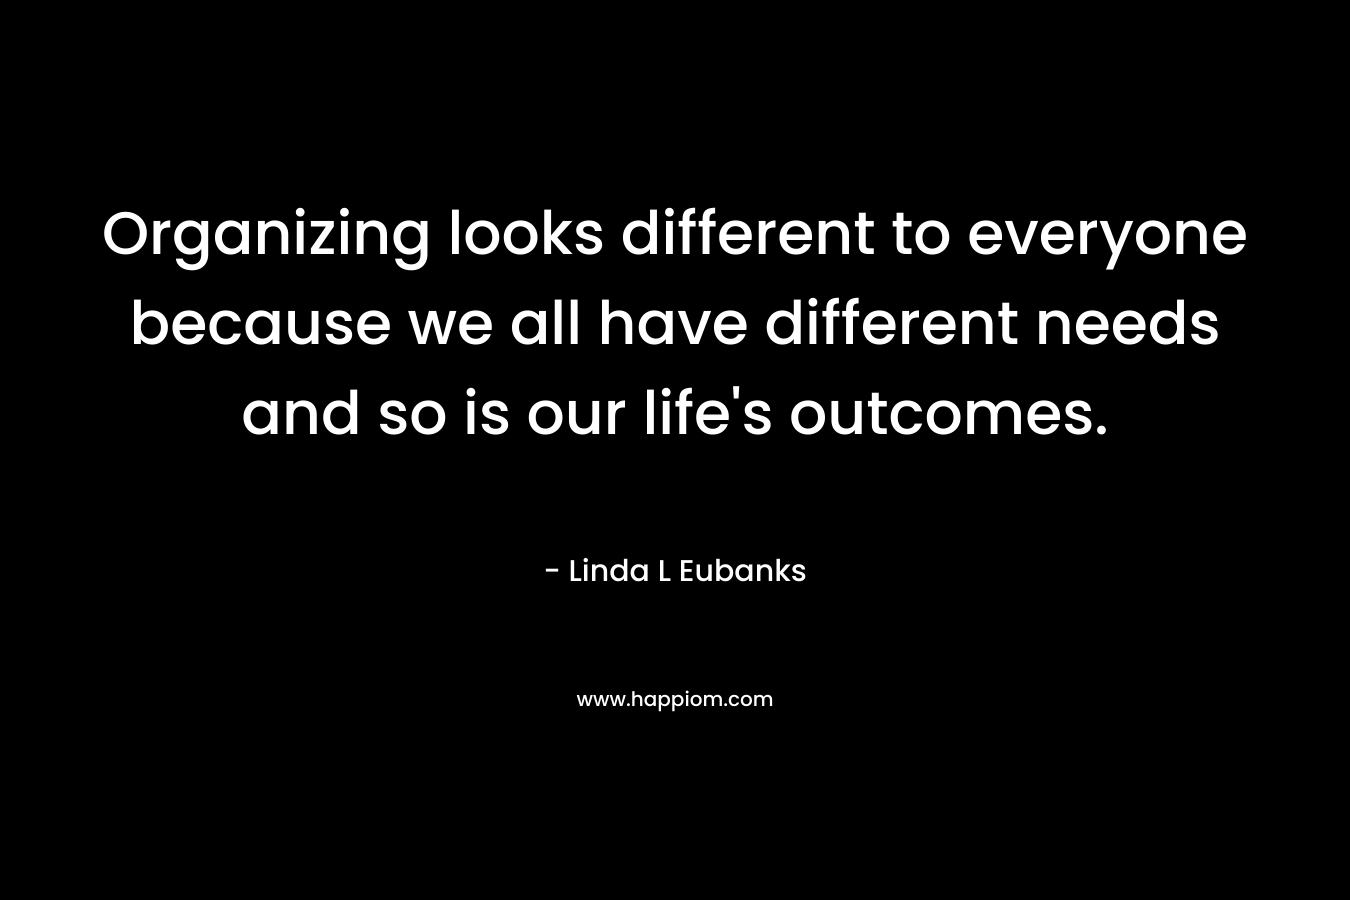 Organizing looks different to everyone because we all have different needs and so is our life’s outcomes. – Linda L Eubanks